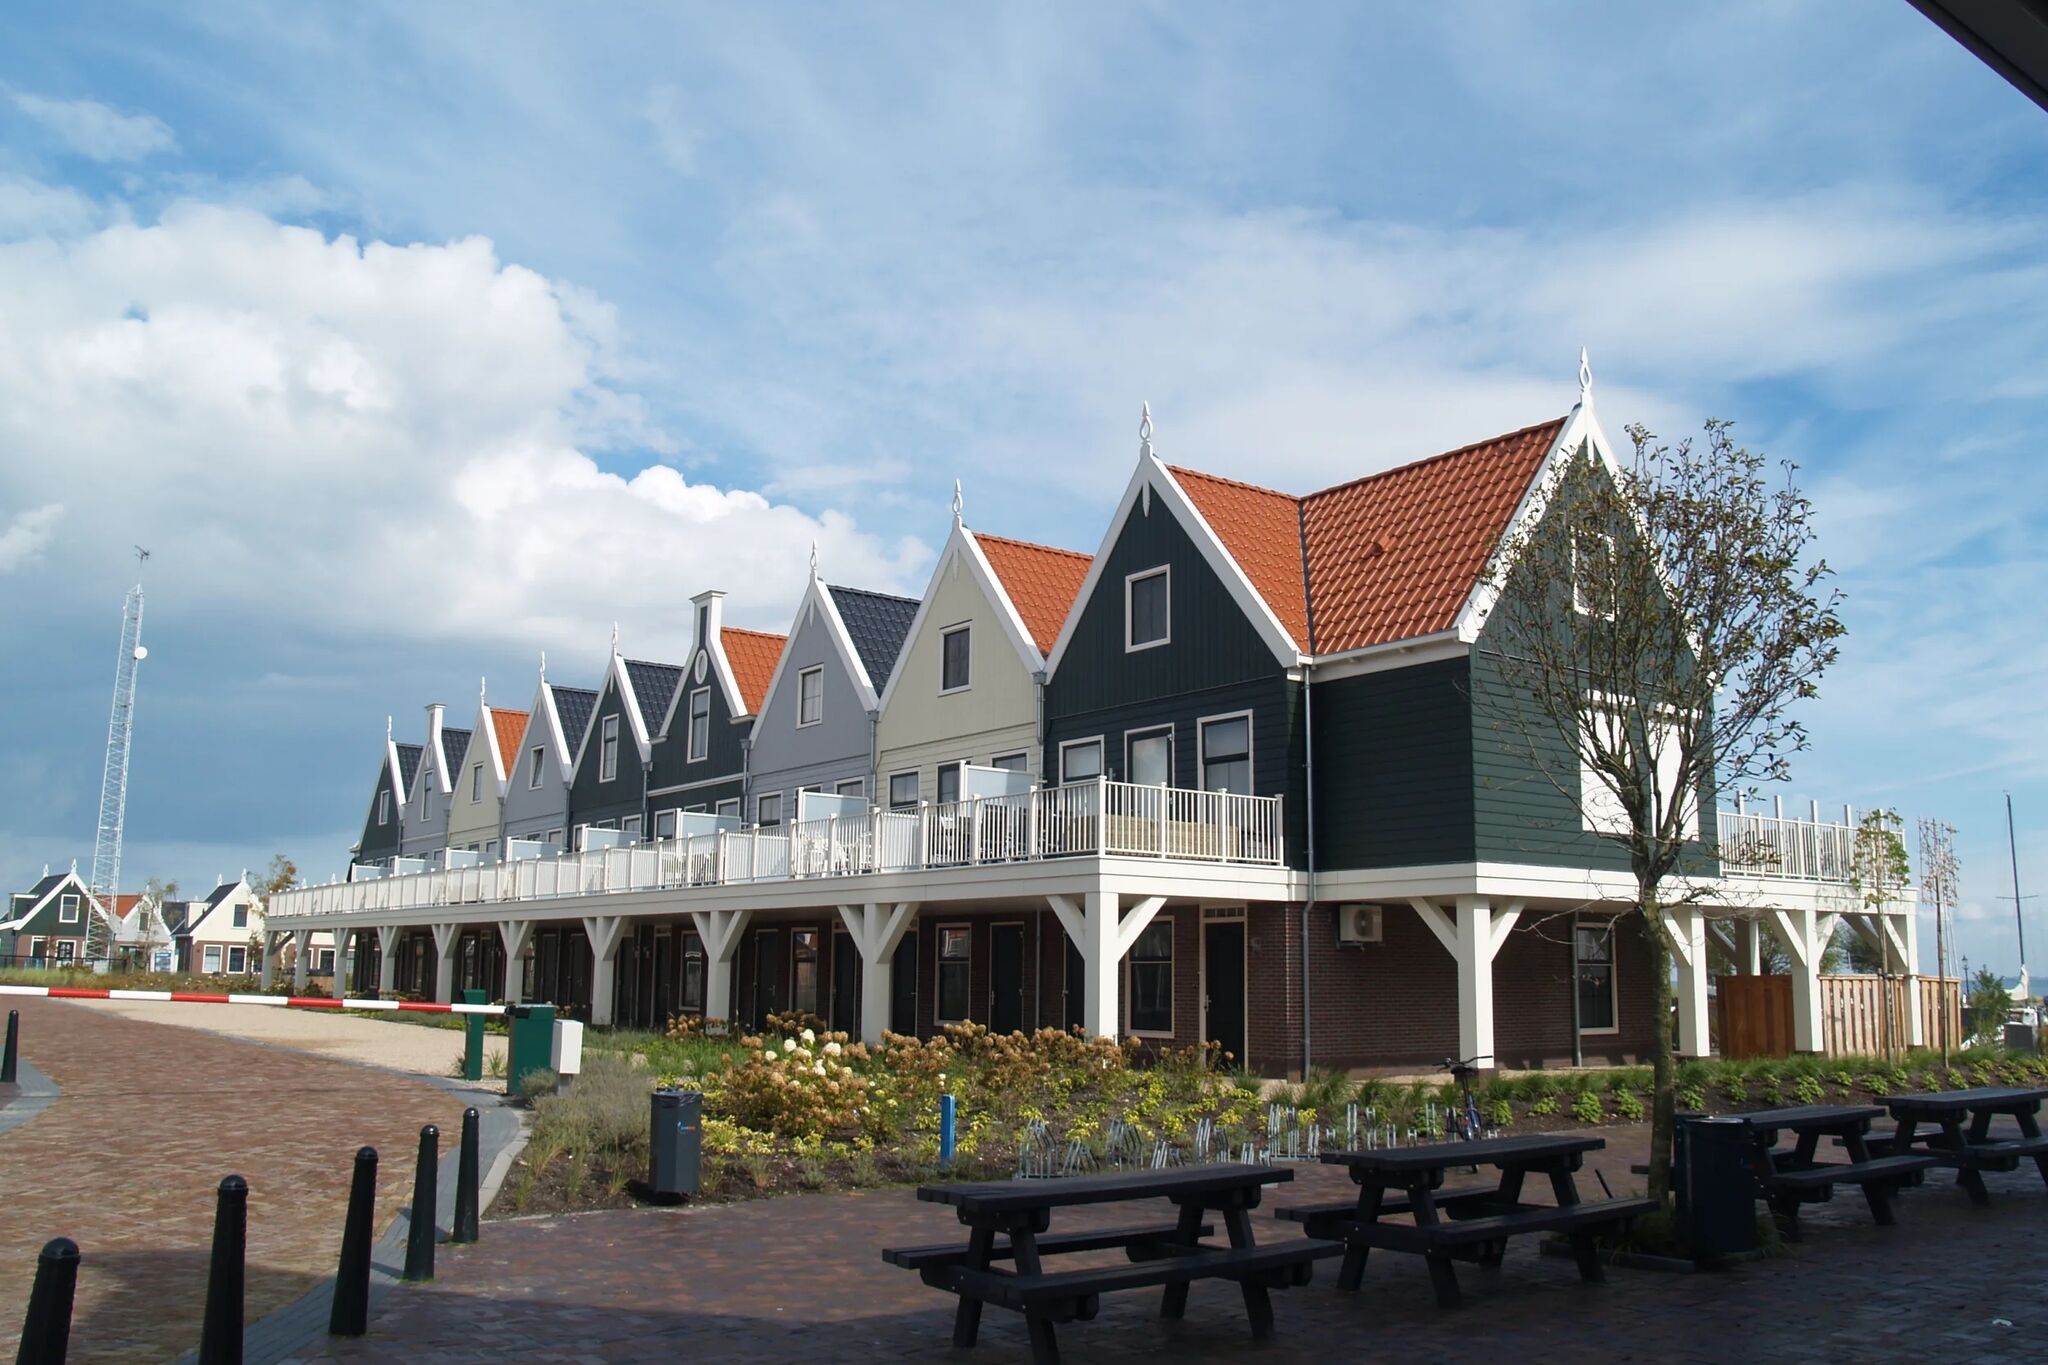 Spacious house with 5 bathrooms, on the Markermeer